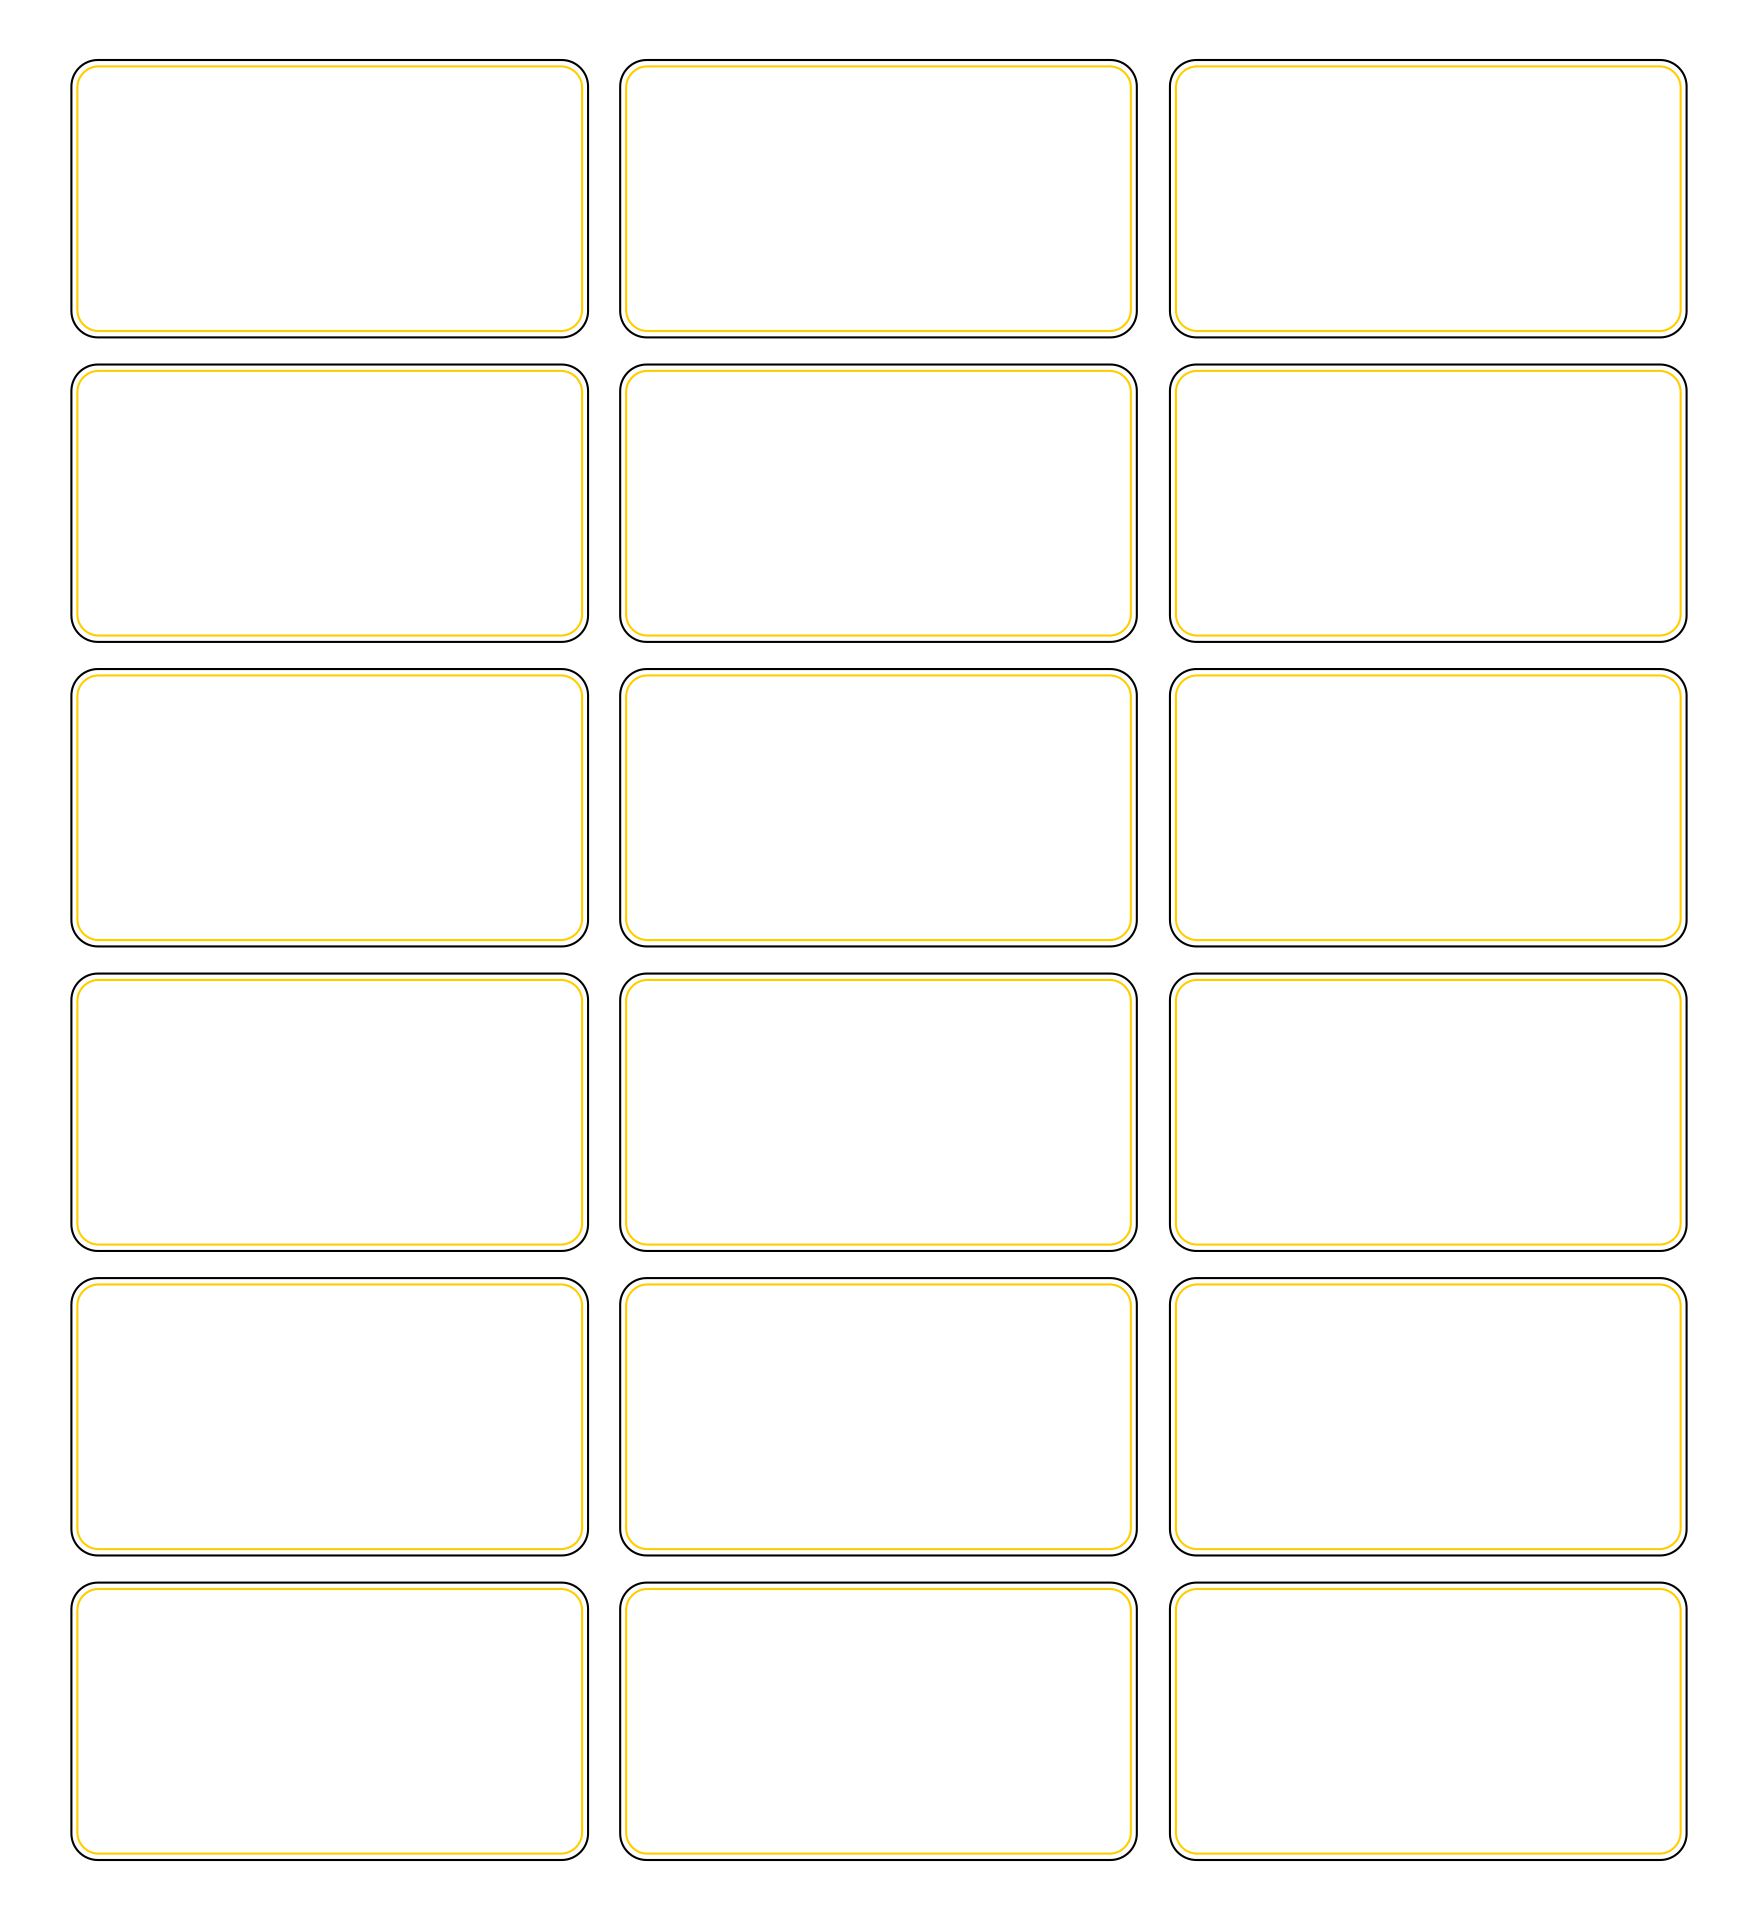 Playing Card Template Word